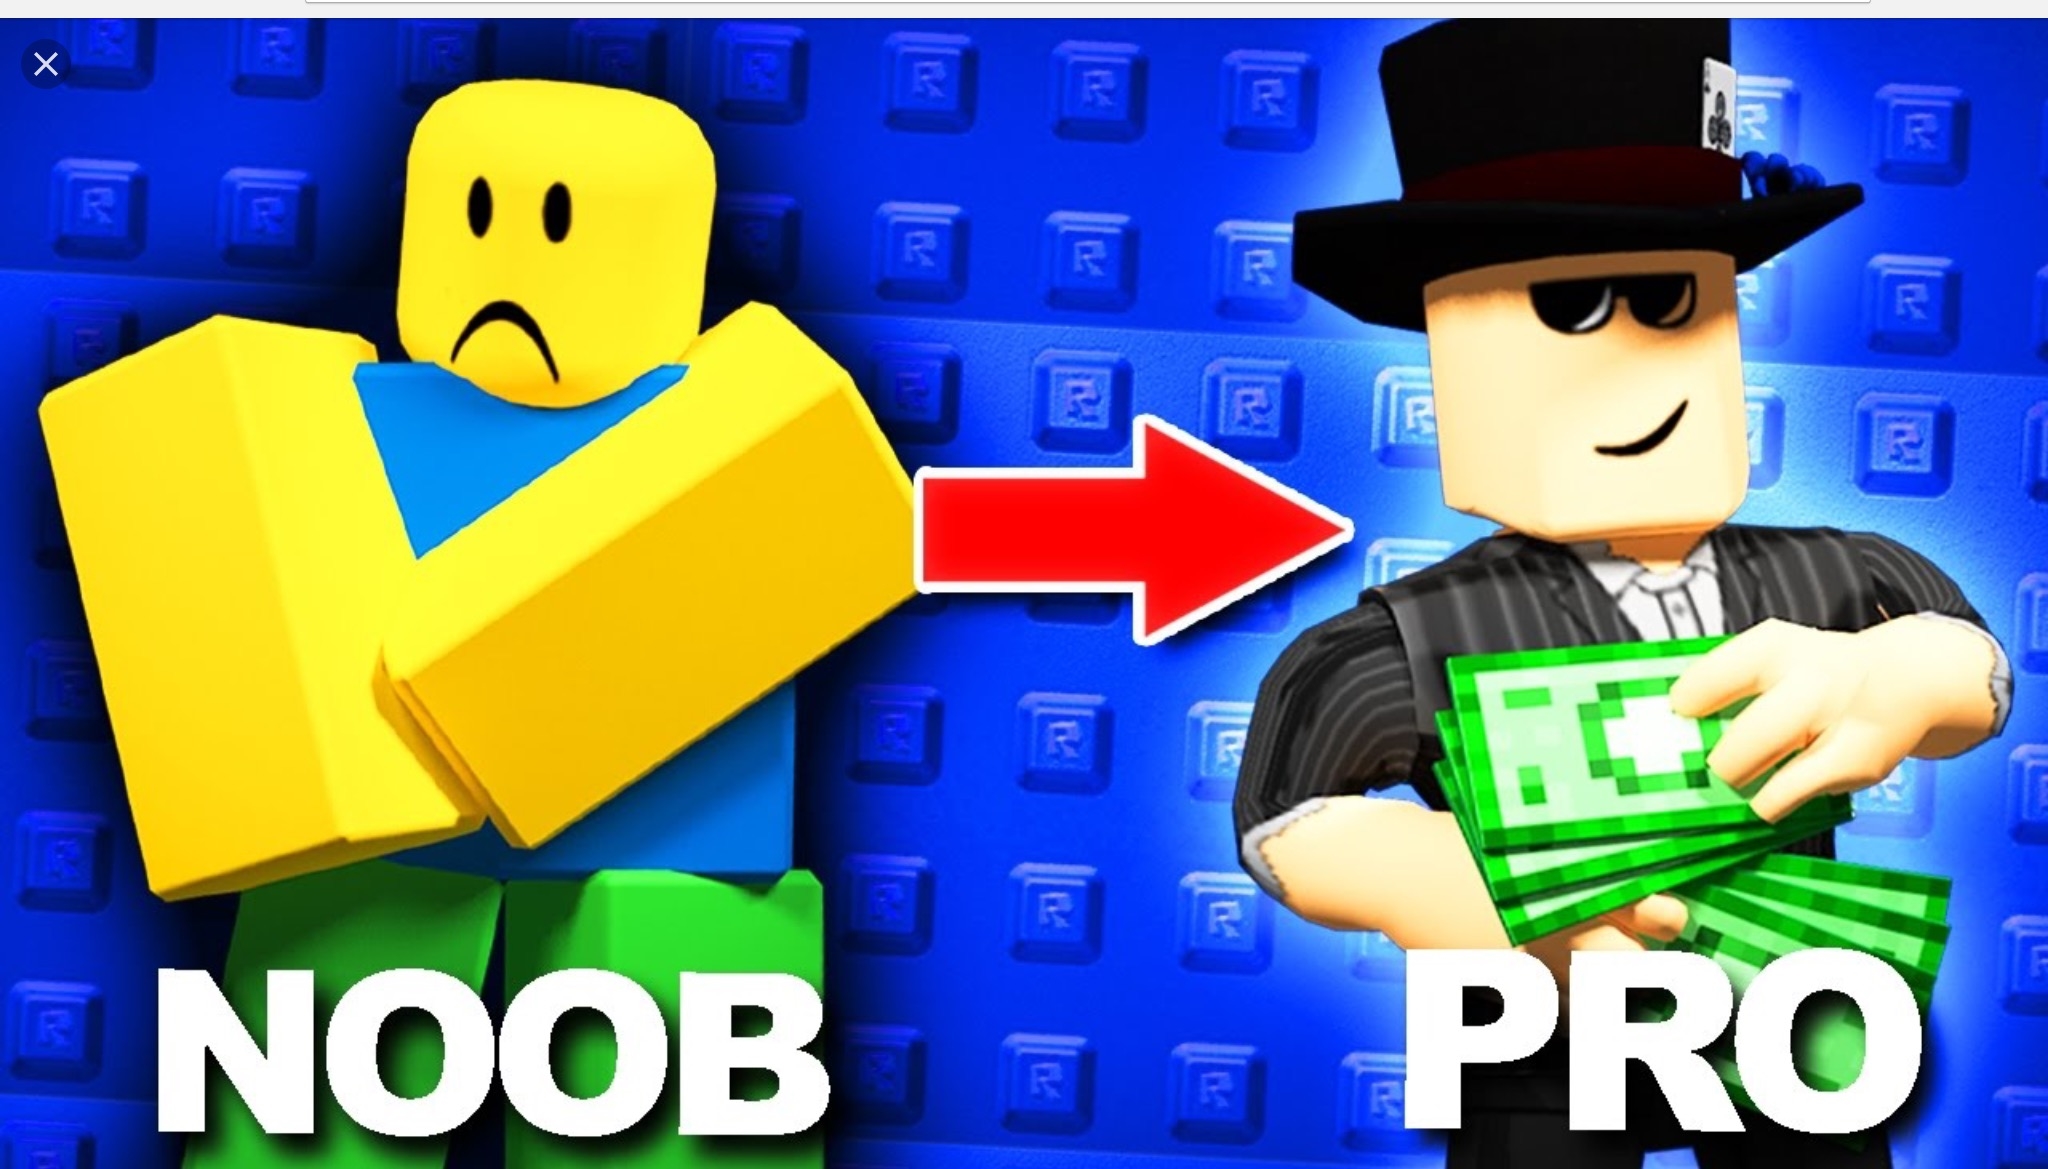 Are You A Noob Or A Pro In Roblox Quiz Hack Robux Cheat Engine 6 1 - become a noob or pro in roblox tynker